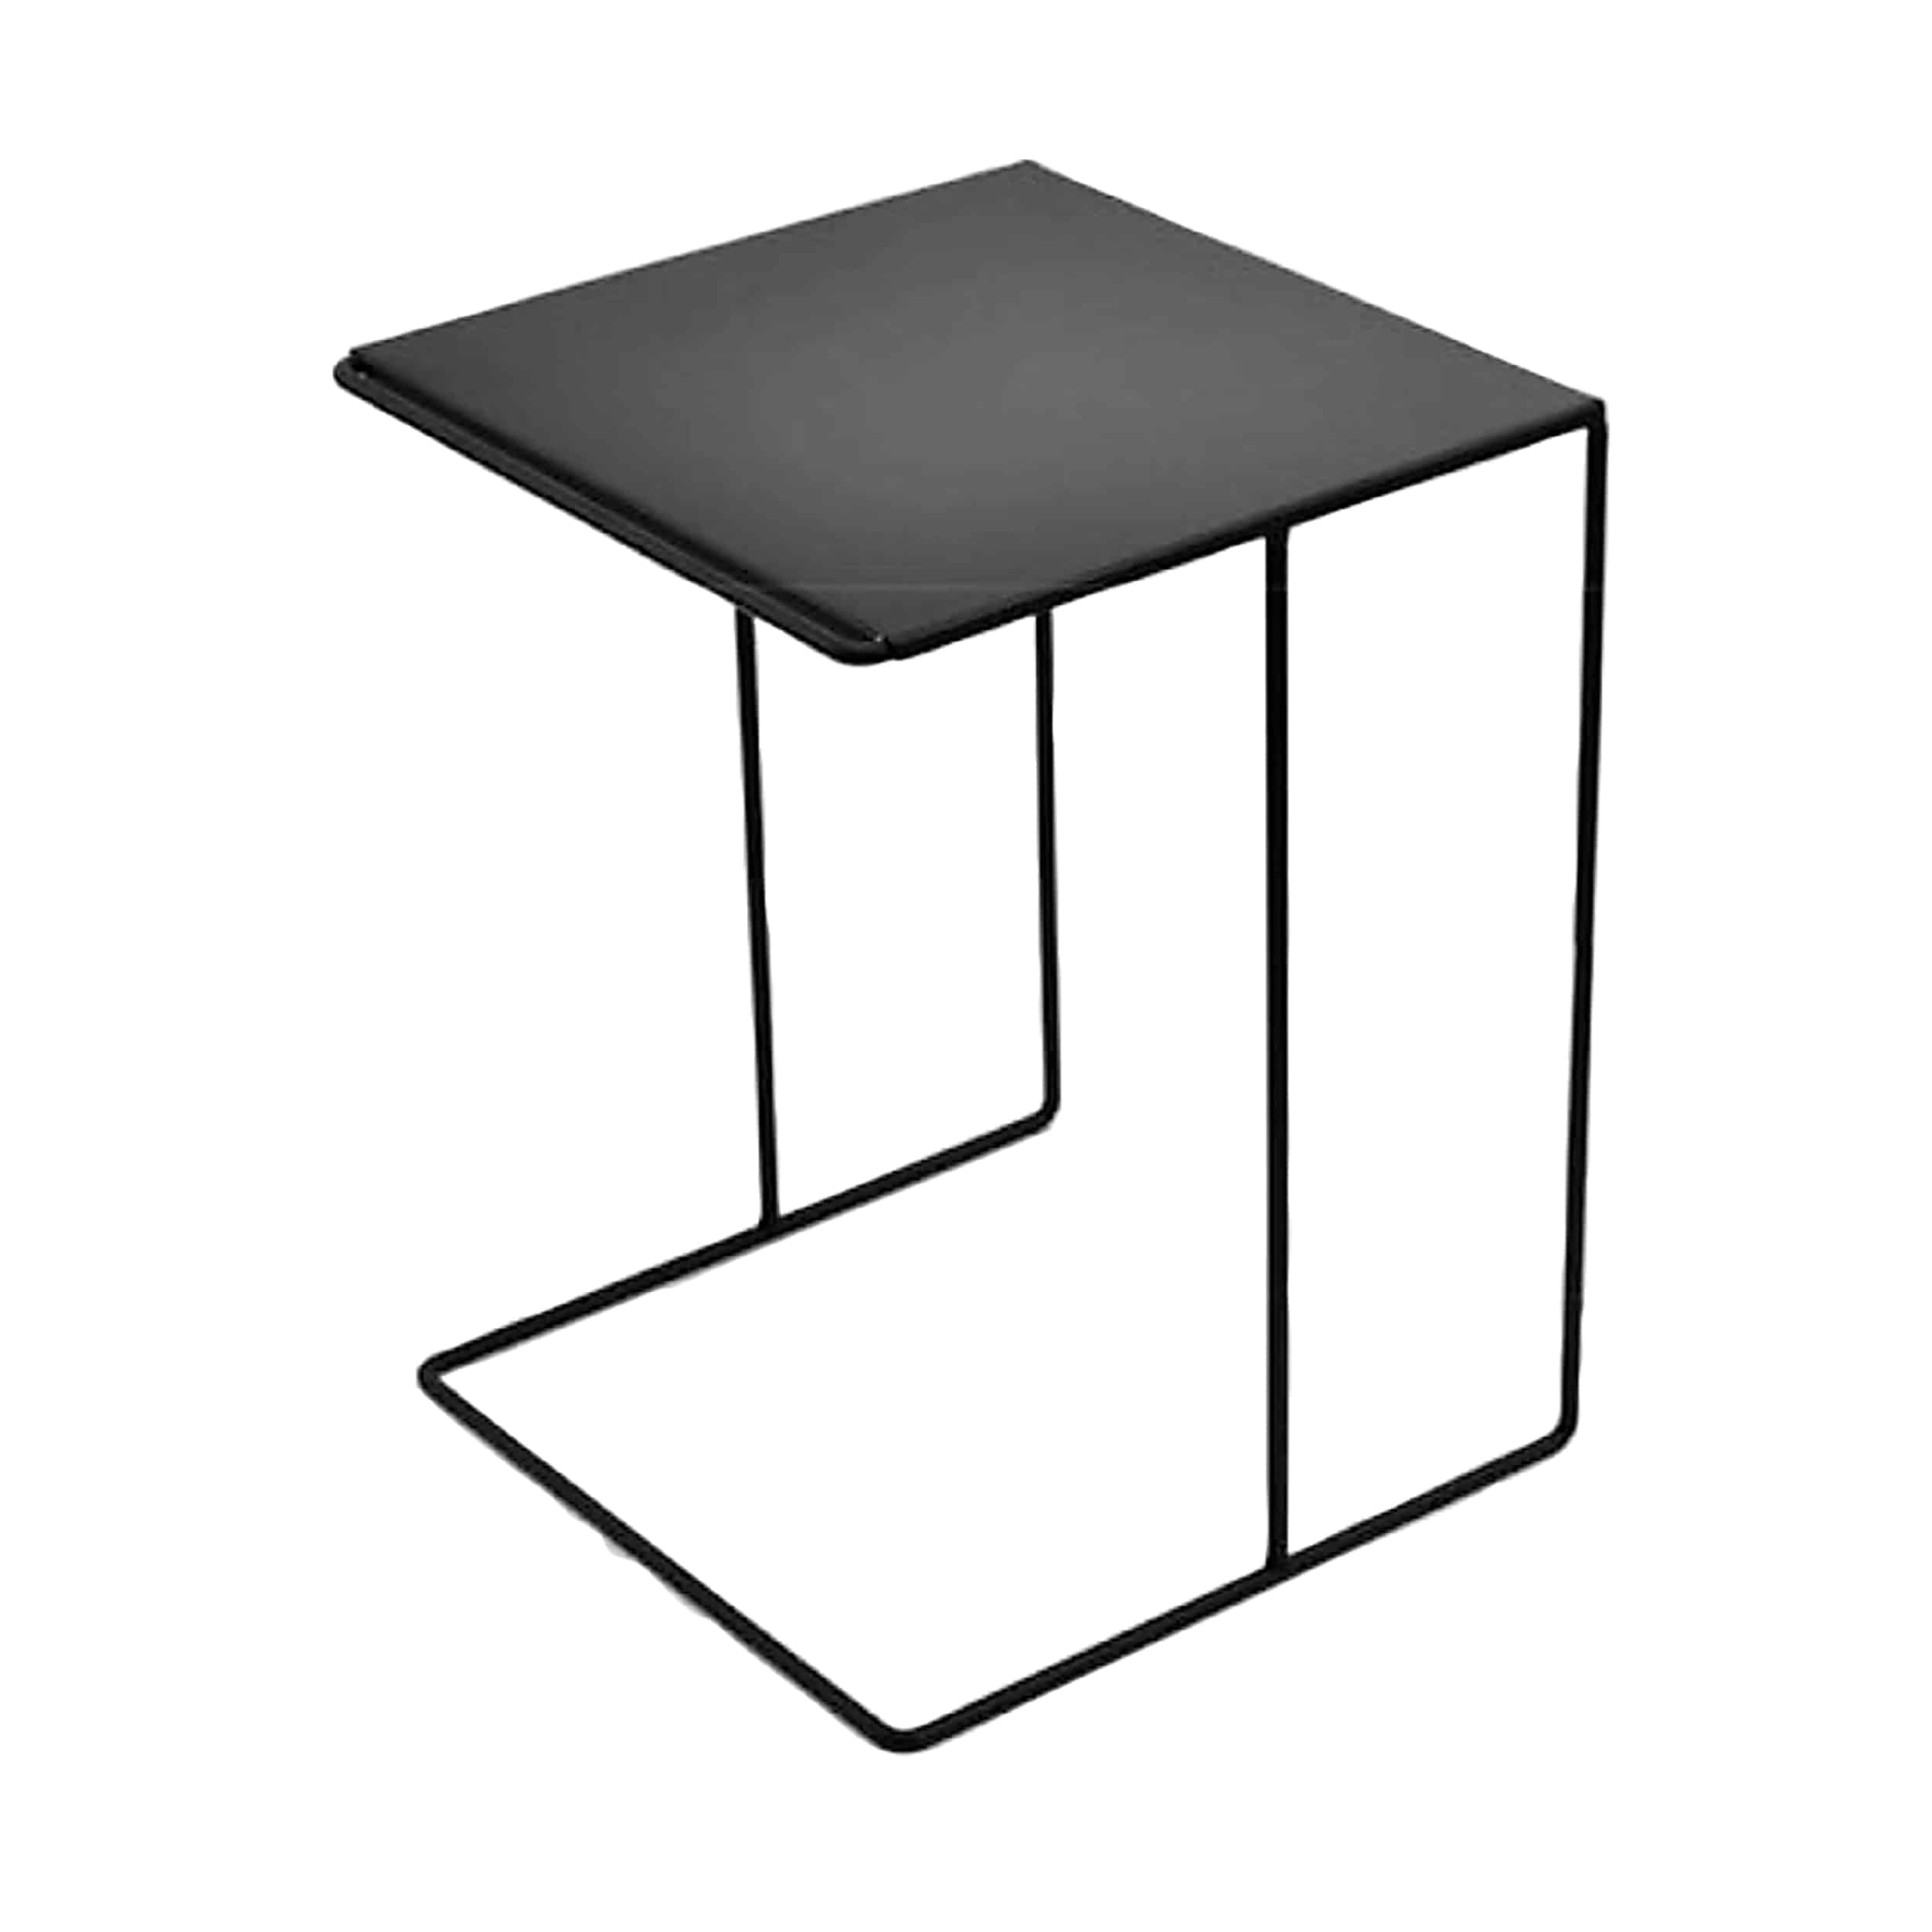 Table d'appoint 4 pieds